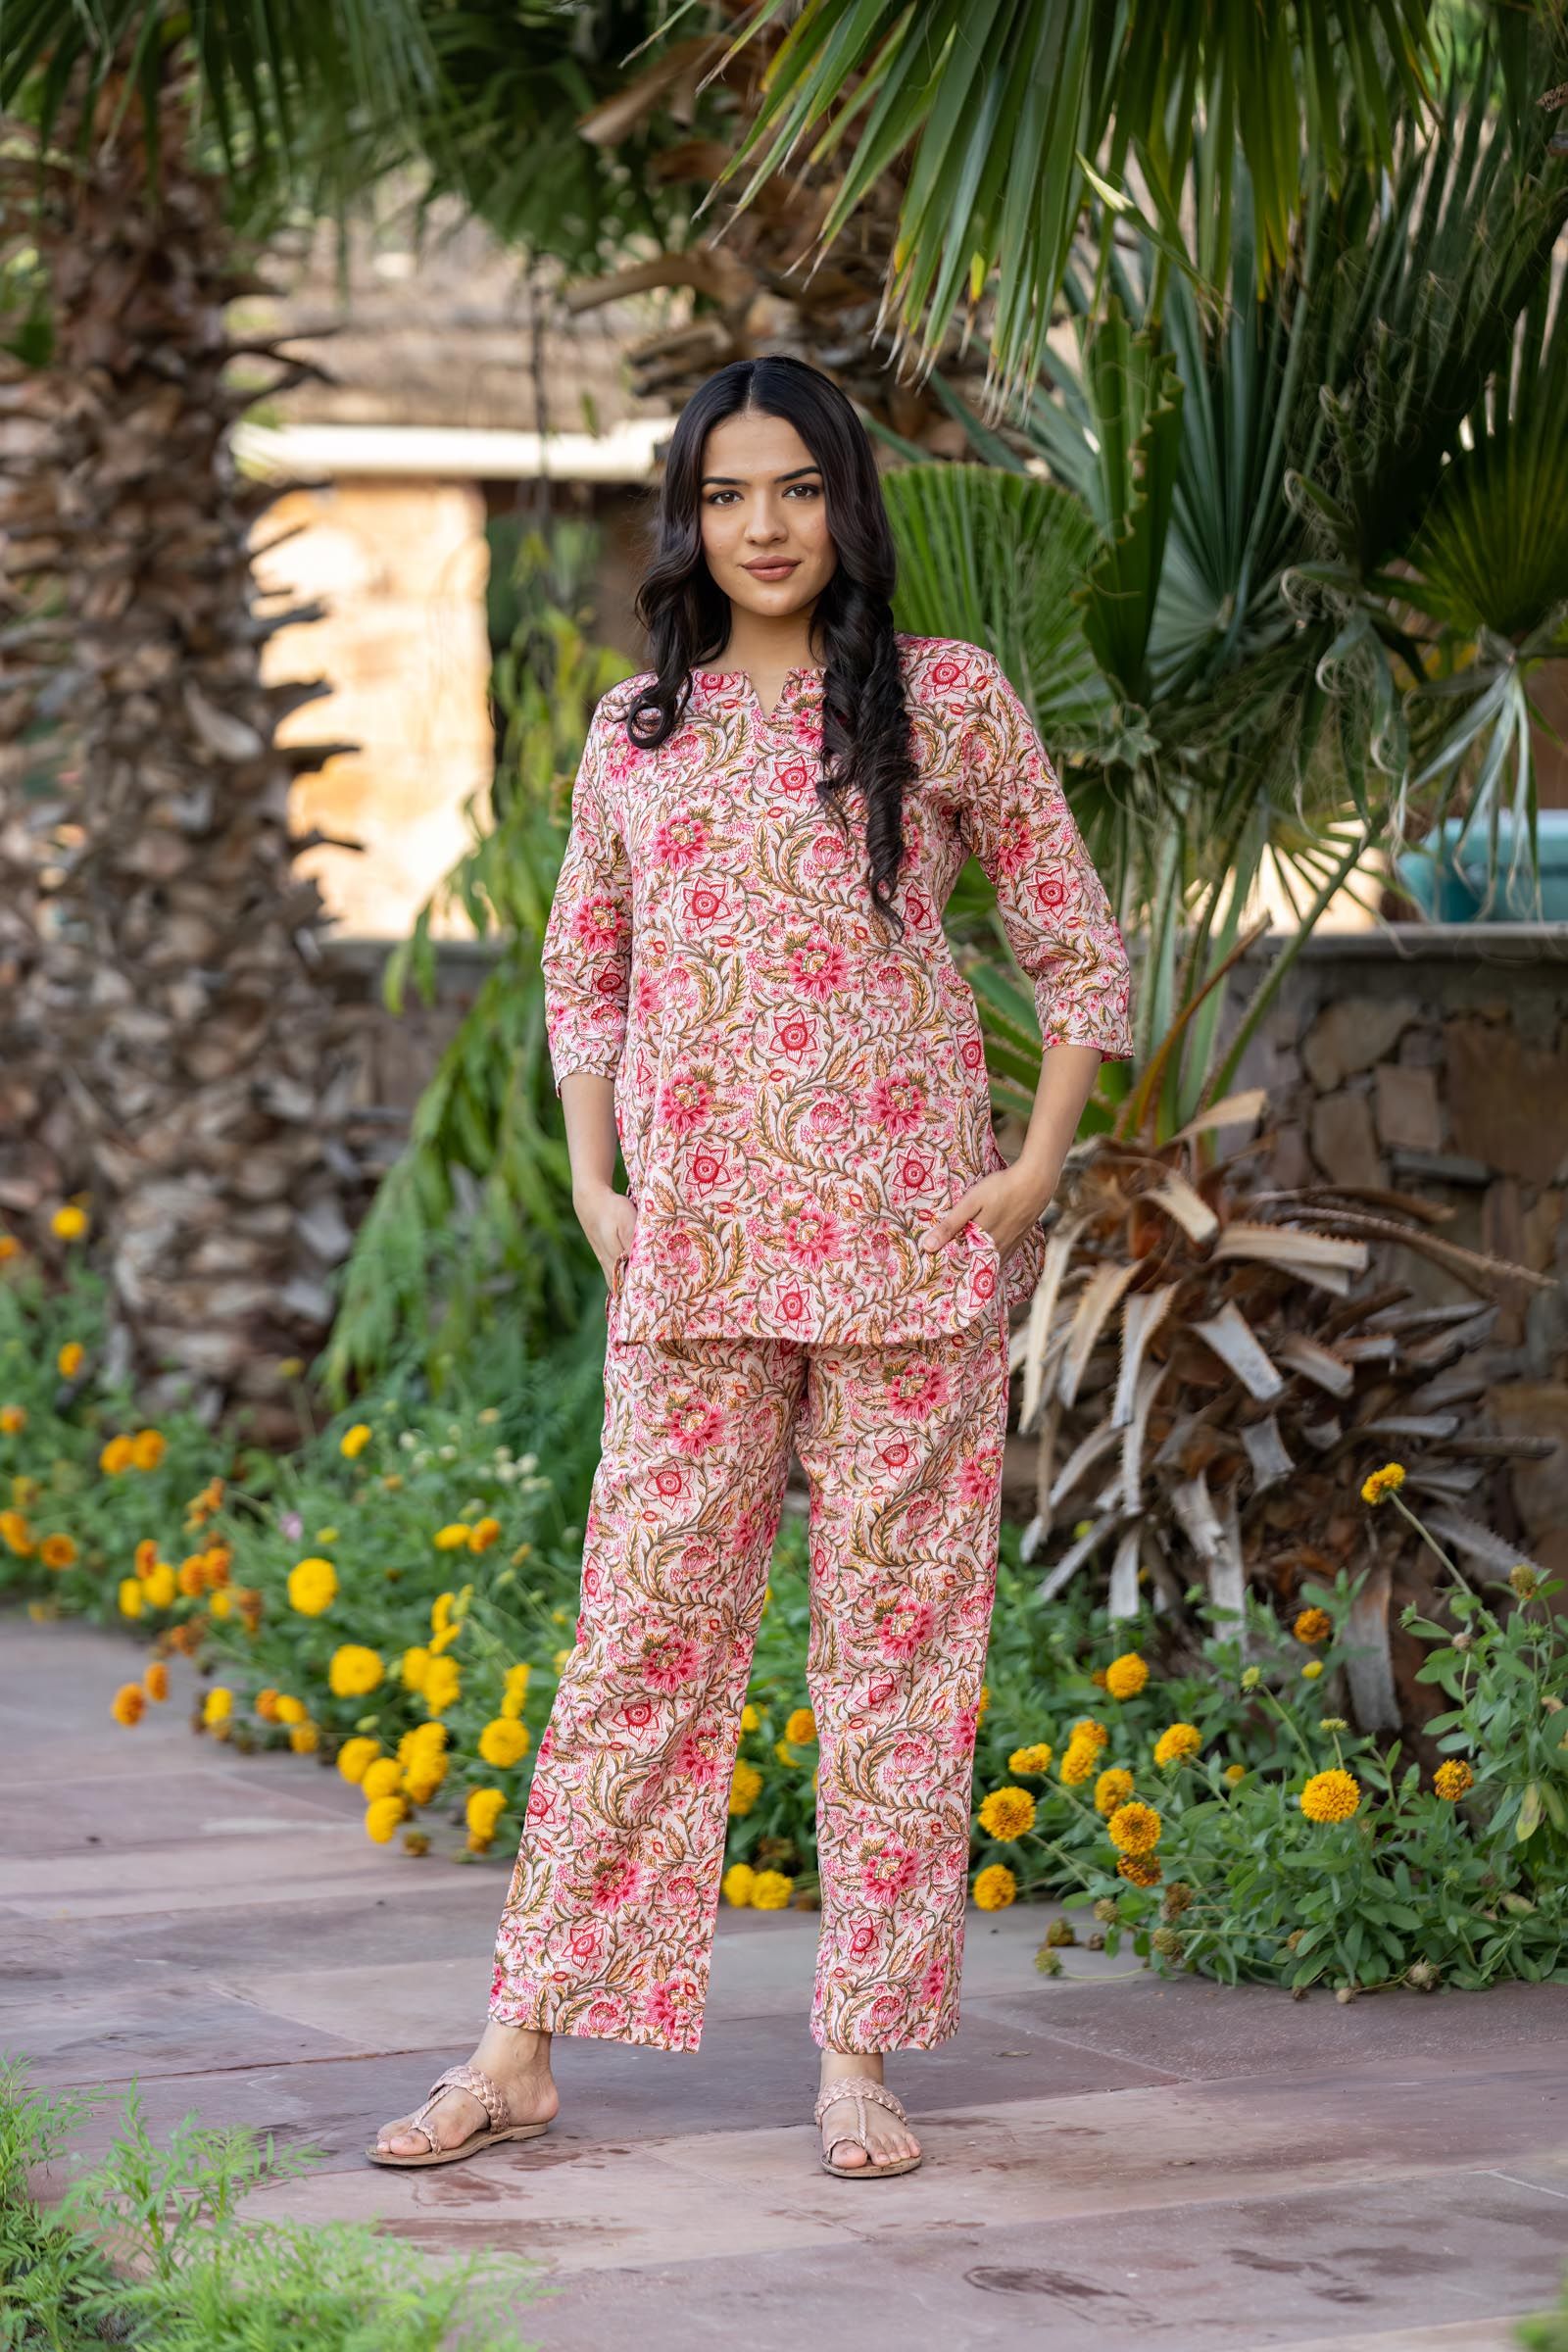 Solid Nightdress & Floral Print Belted Robe | Plus Size Fashion